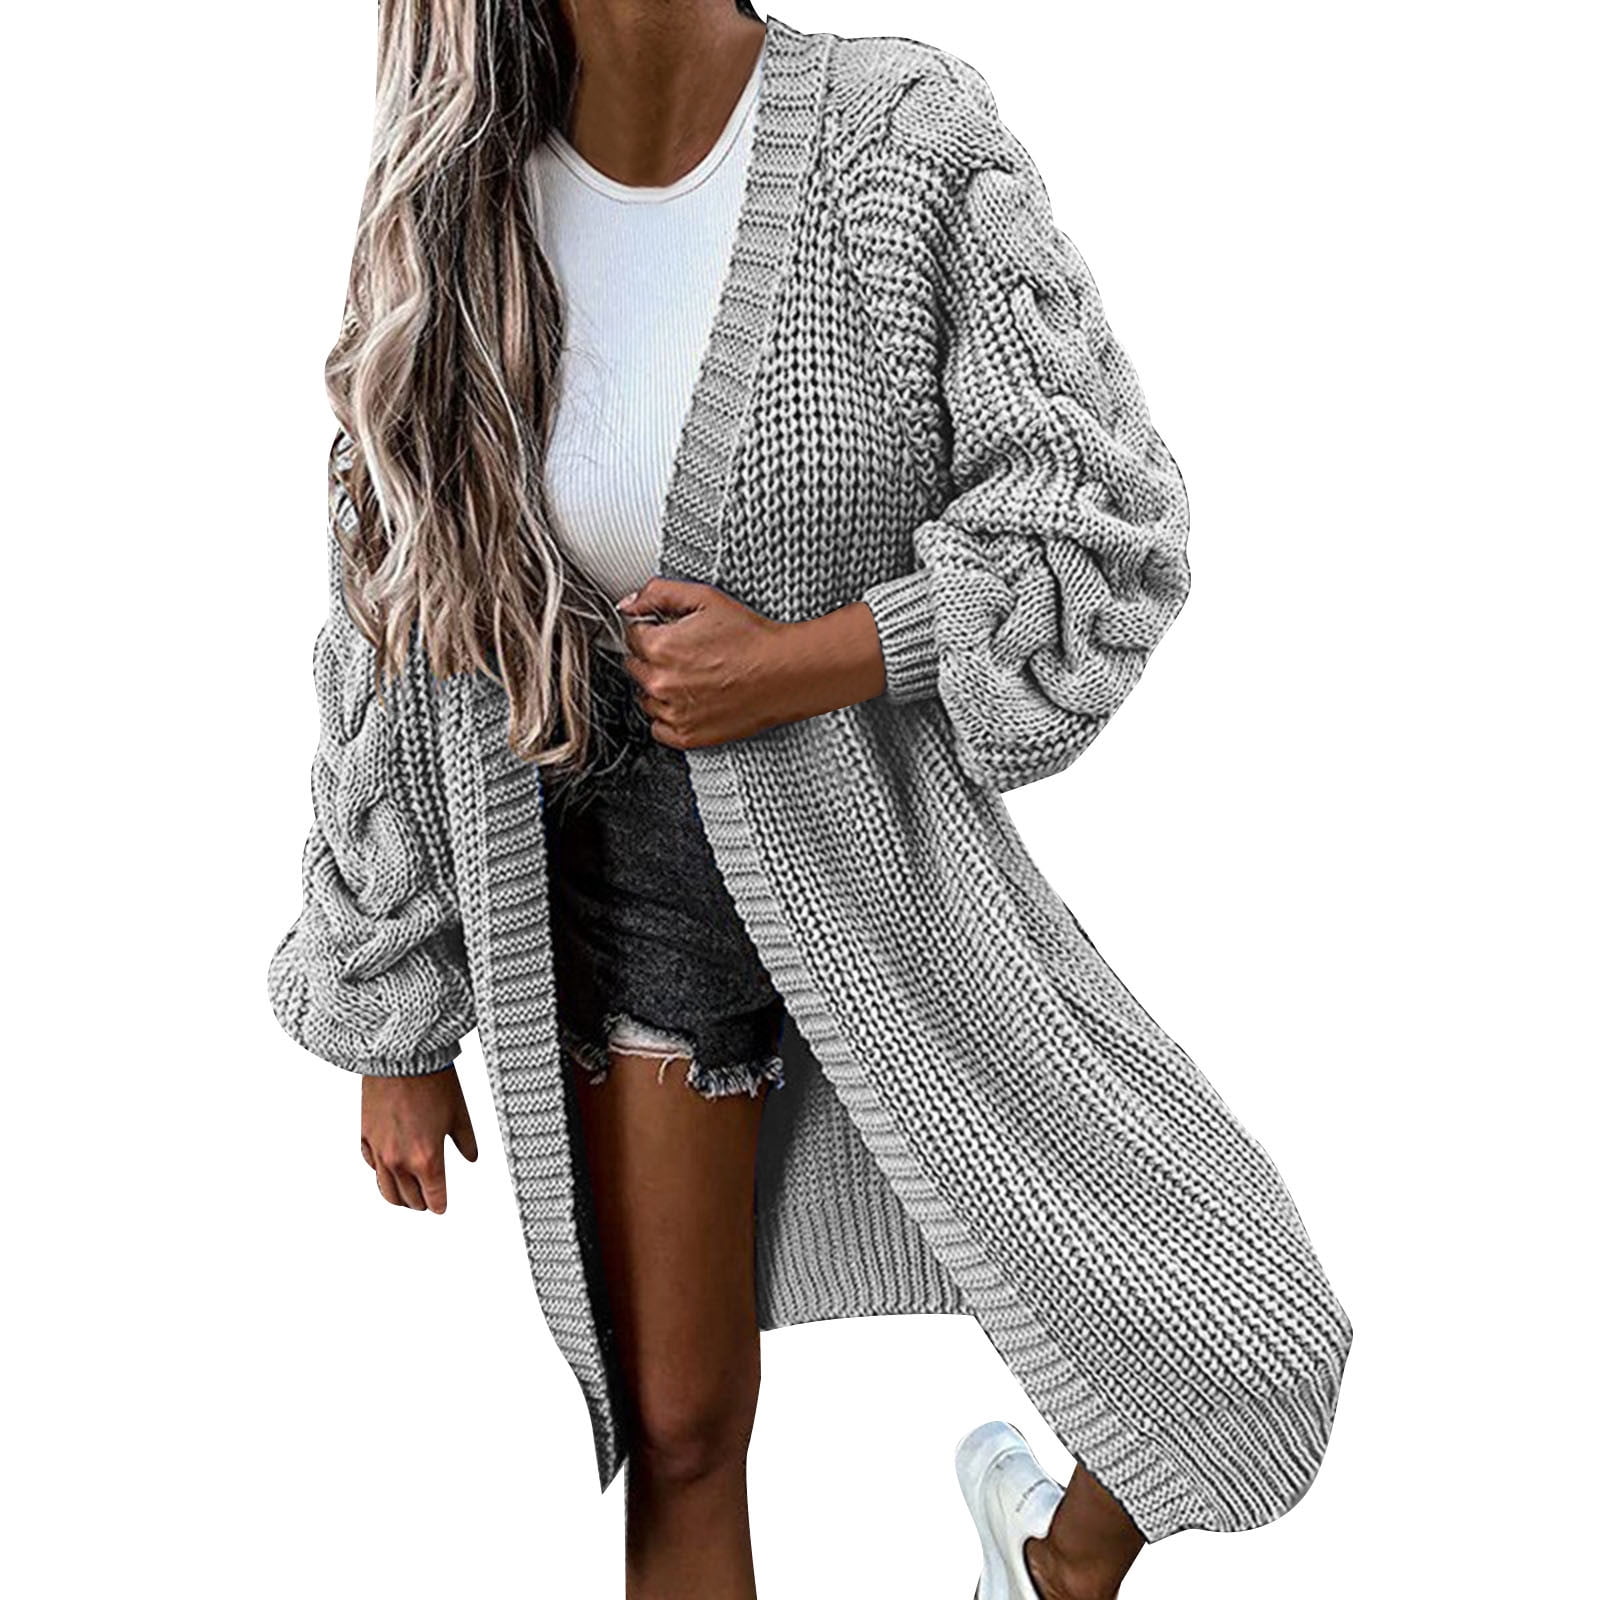 Paptzroi Women Casual Long Sleeve Knitted Open Front Elegant Warm Oversized New Knitted Sweater Cardigan Plaid Sweater Coats for Women Reading Shawl Pockets for Women 70s Coats for -